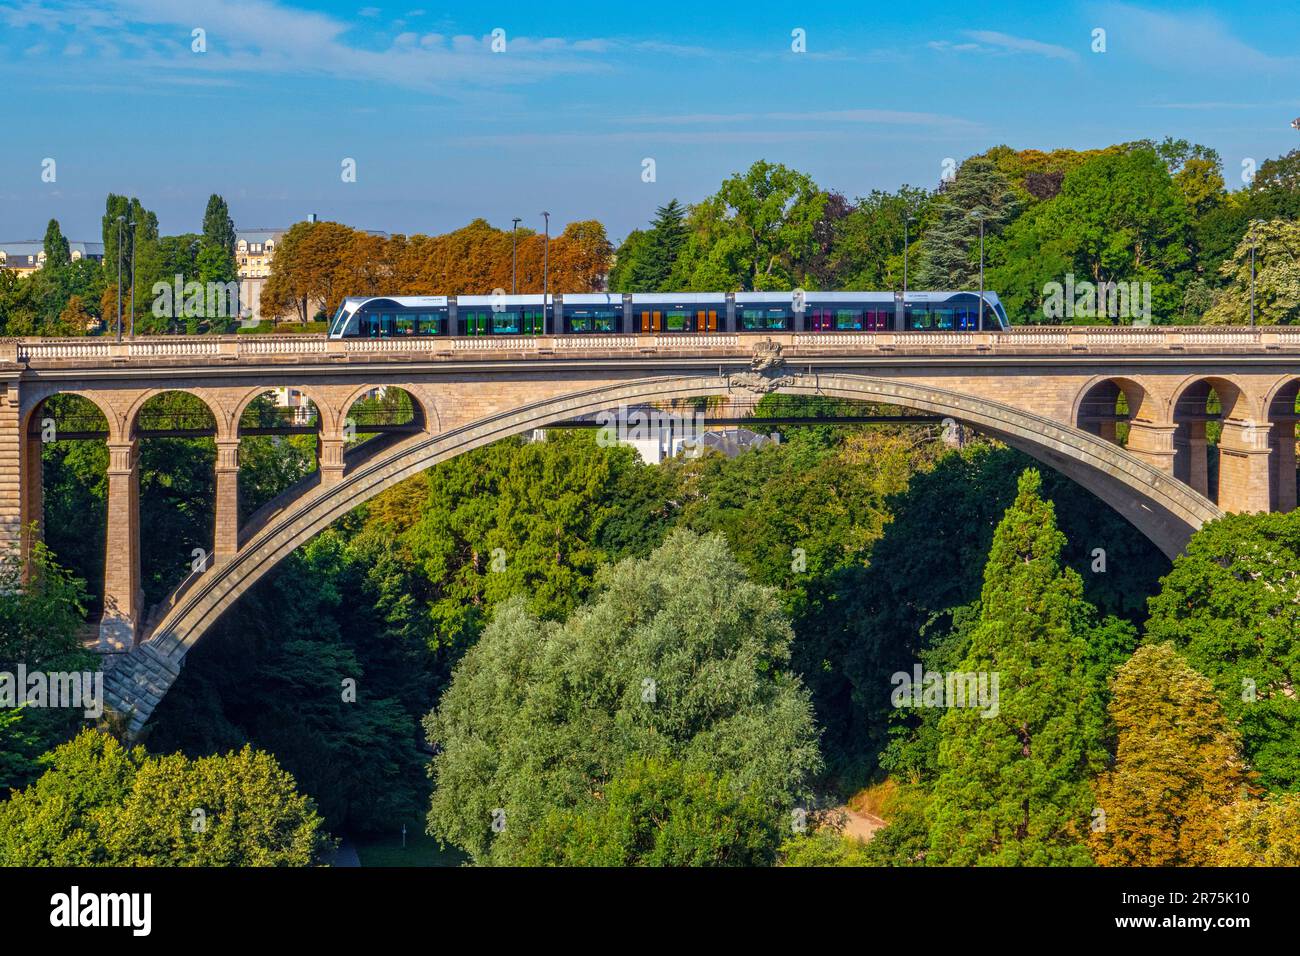 Adolphe Bridge over the Petrusse Valley, Luxembourg City, Benelux, Benelux, Luxembourg Stock Photo